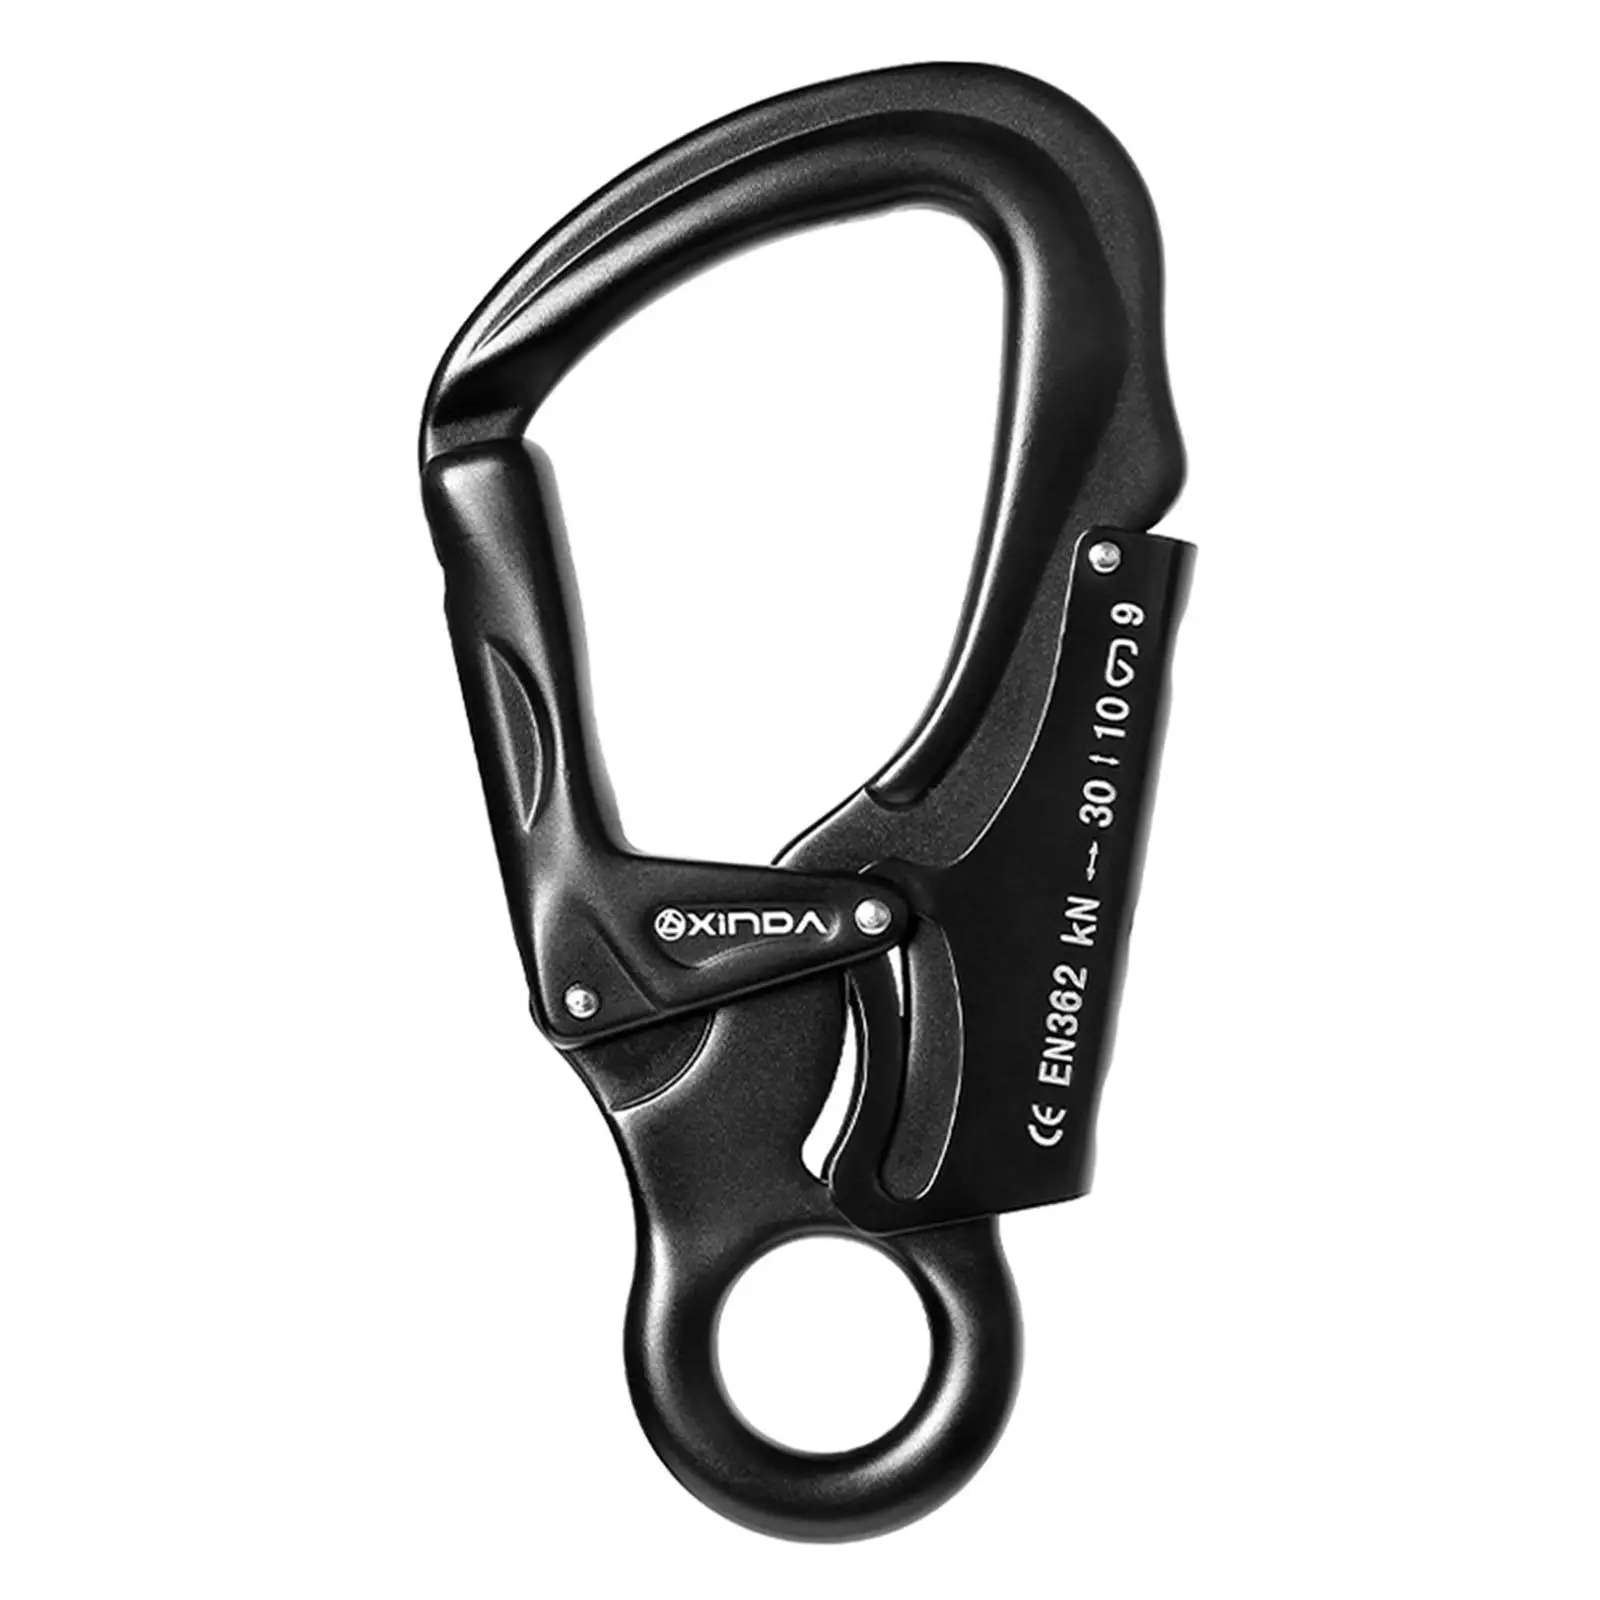 Auto Locking Carabiner Aluminum Alloy Keyring Lock Hook Hardware for Rock Climbing Outdoor Mountaineering Dog Leash Rappelling